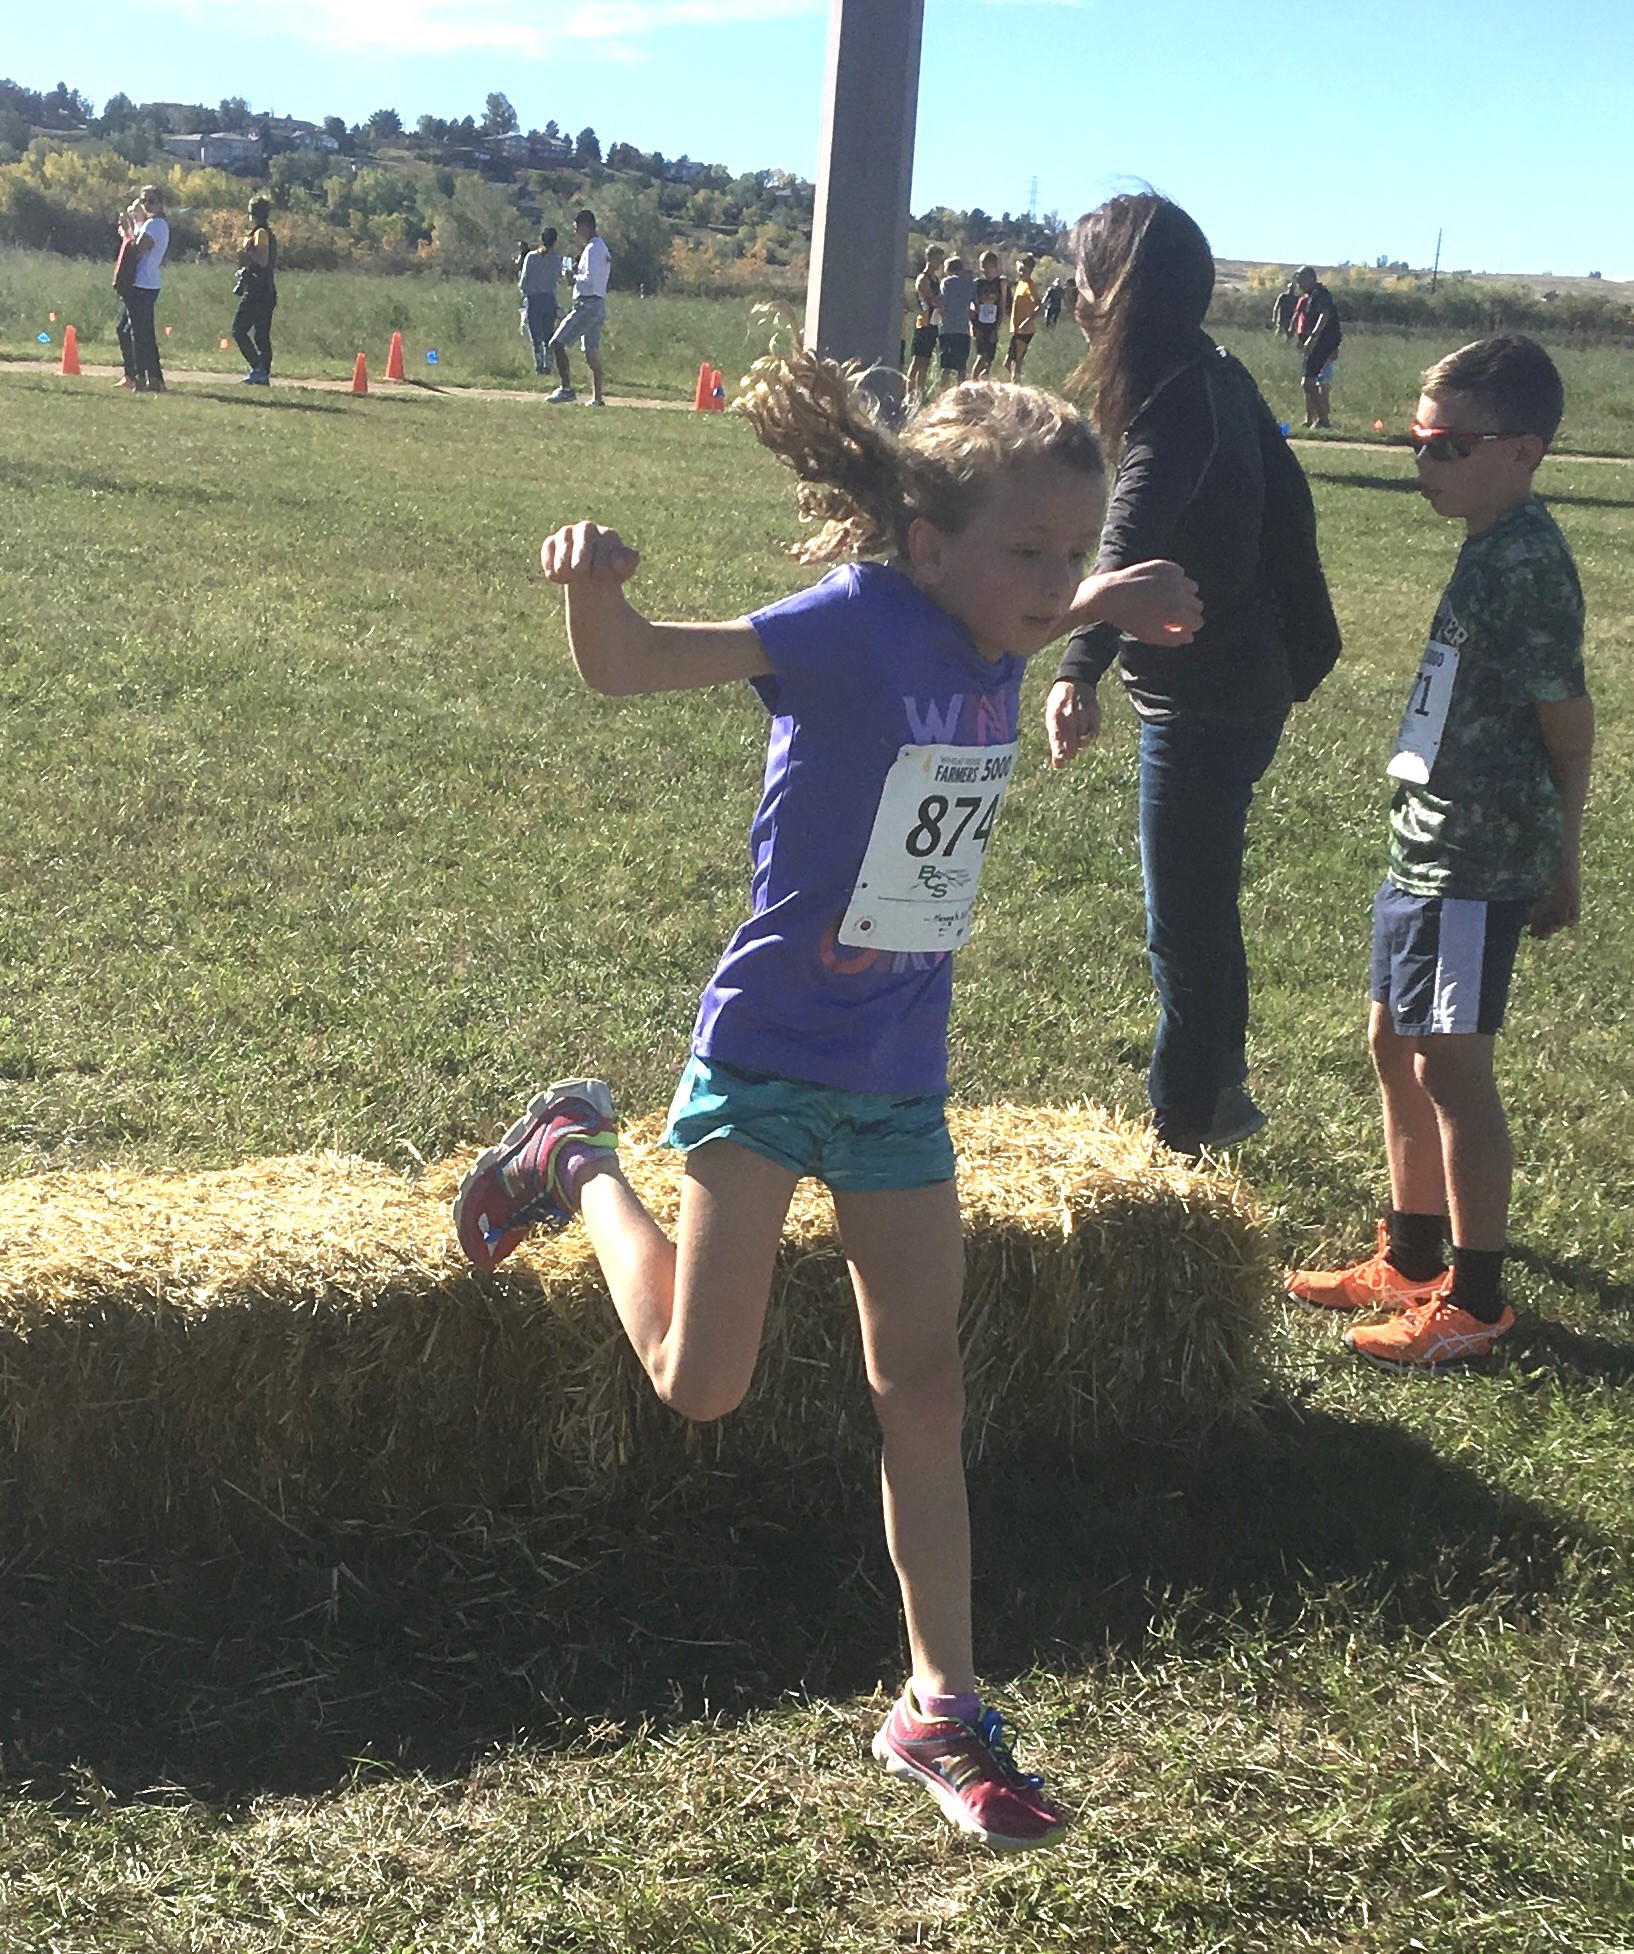 Girls jumping bale at XC race